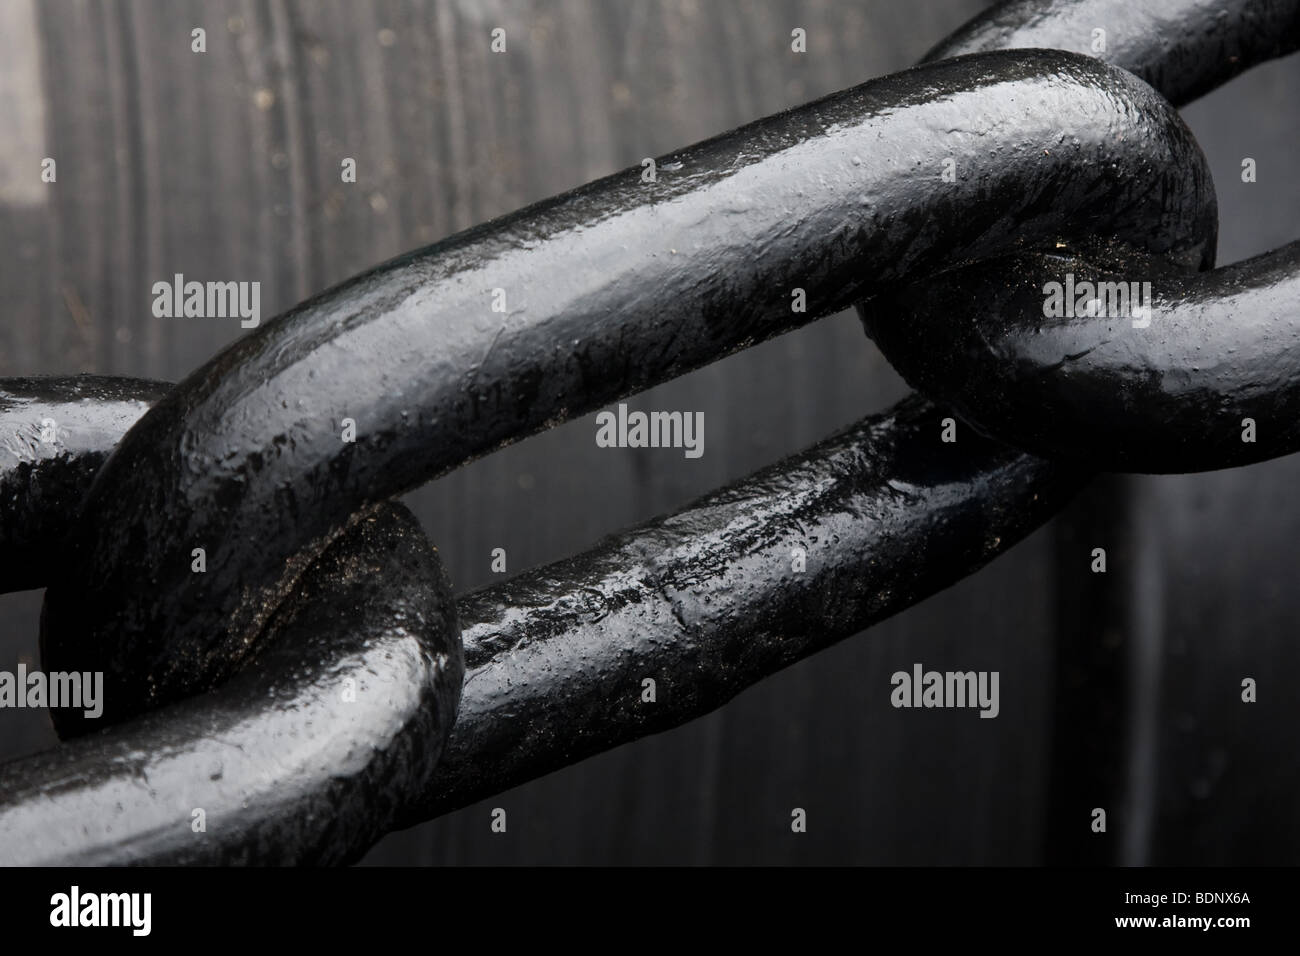 Ship ships anchor chain links detail graphic Stock Photo - Alamy